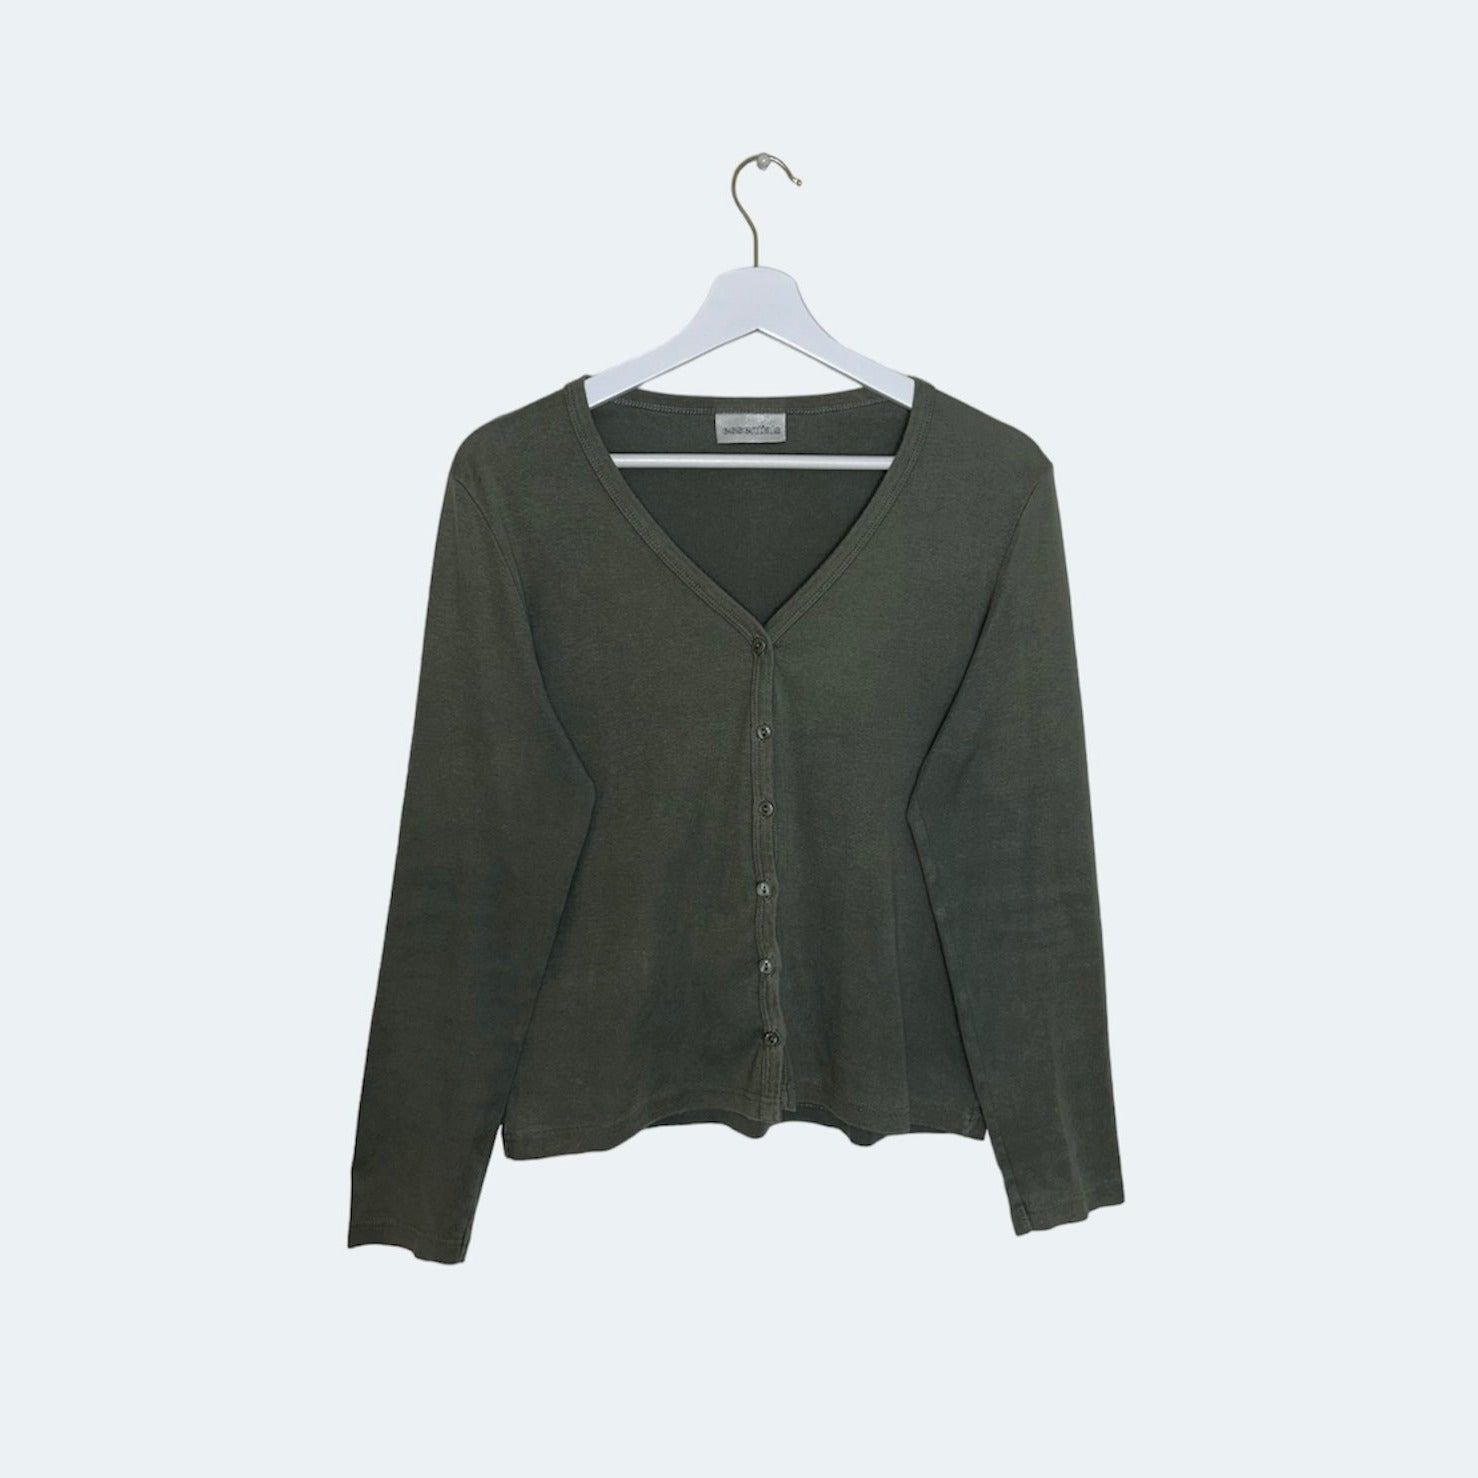 green button up long sleeve top shown on a white background